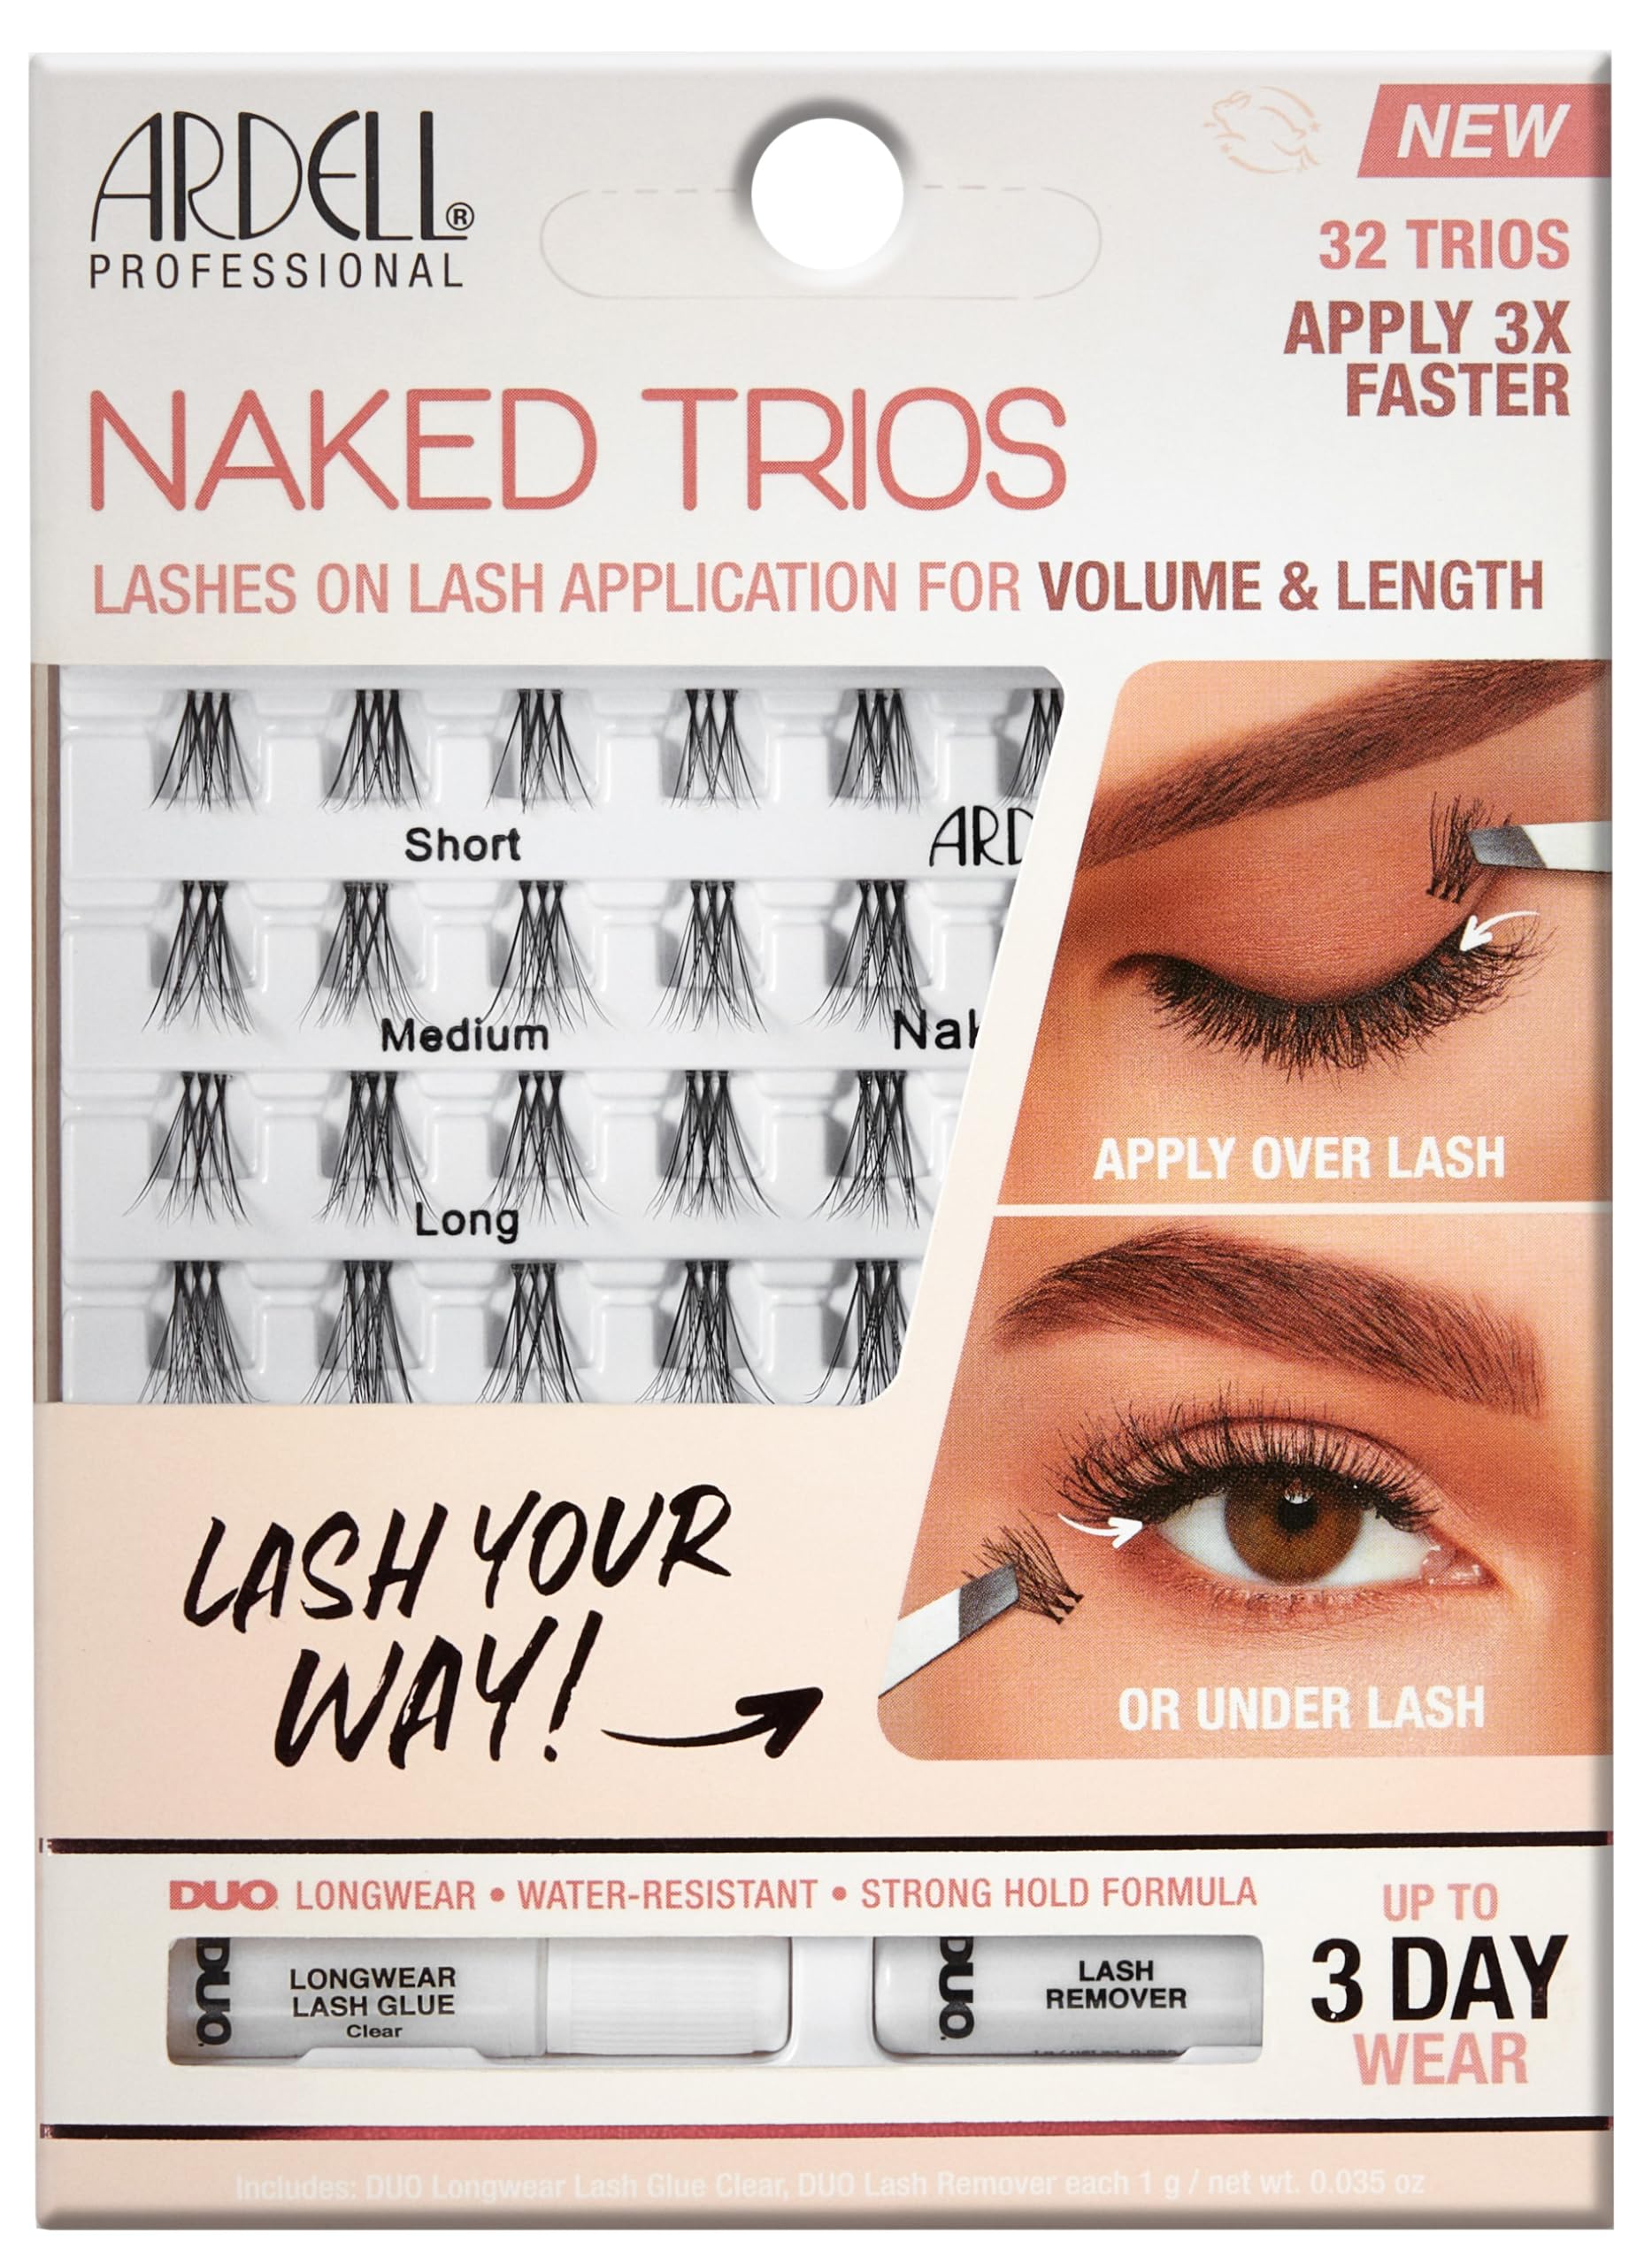 Ardell Naked Lashes Trios Kit, 32 Trios, 1 pack